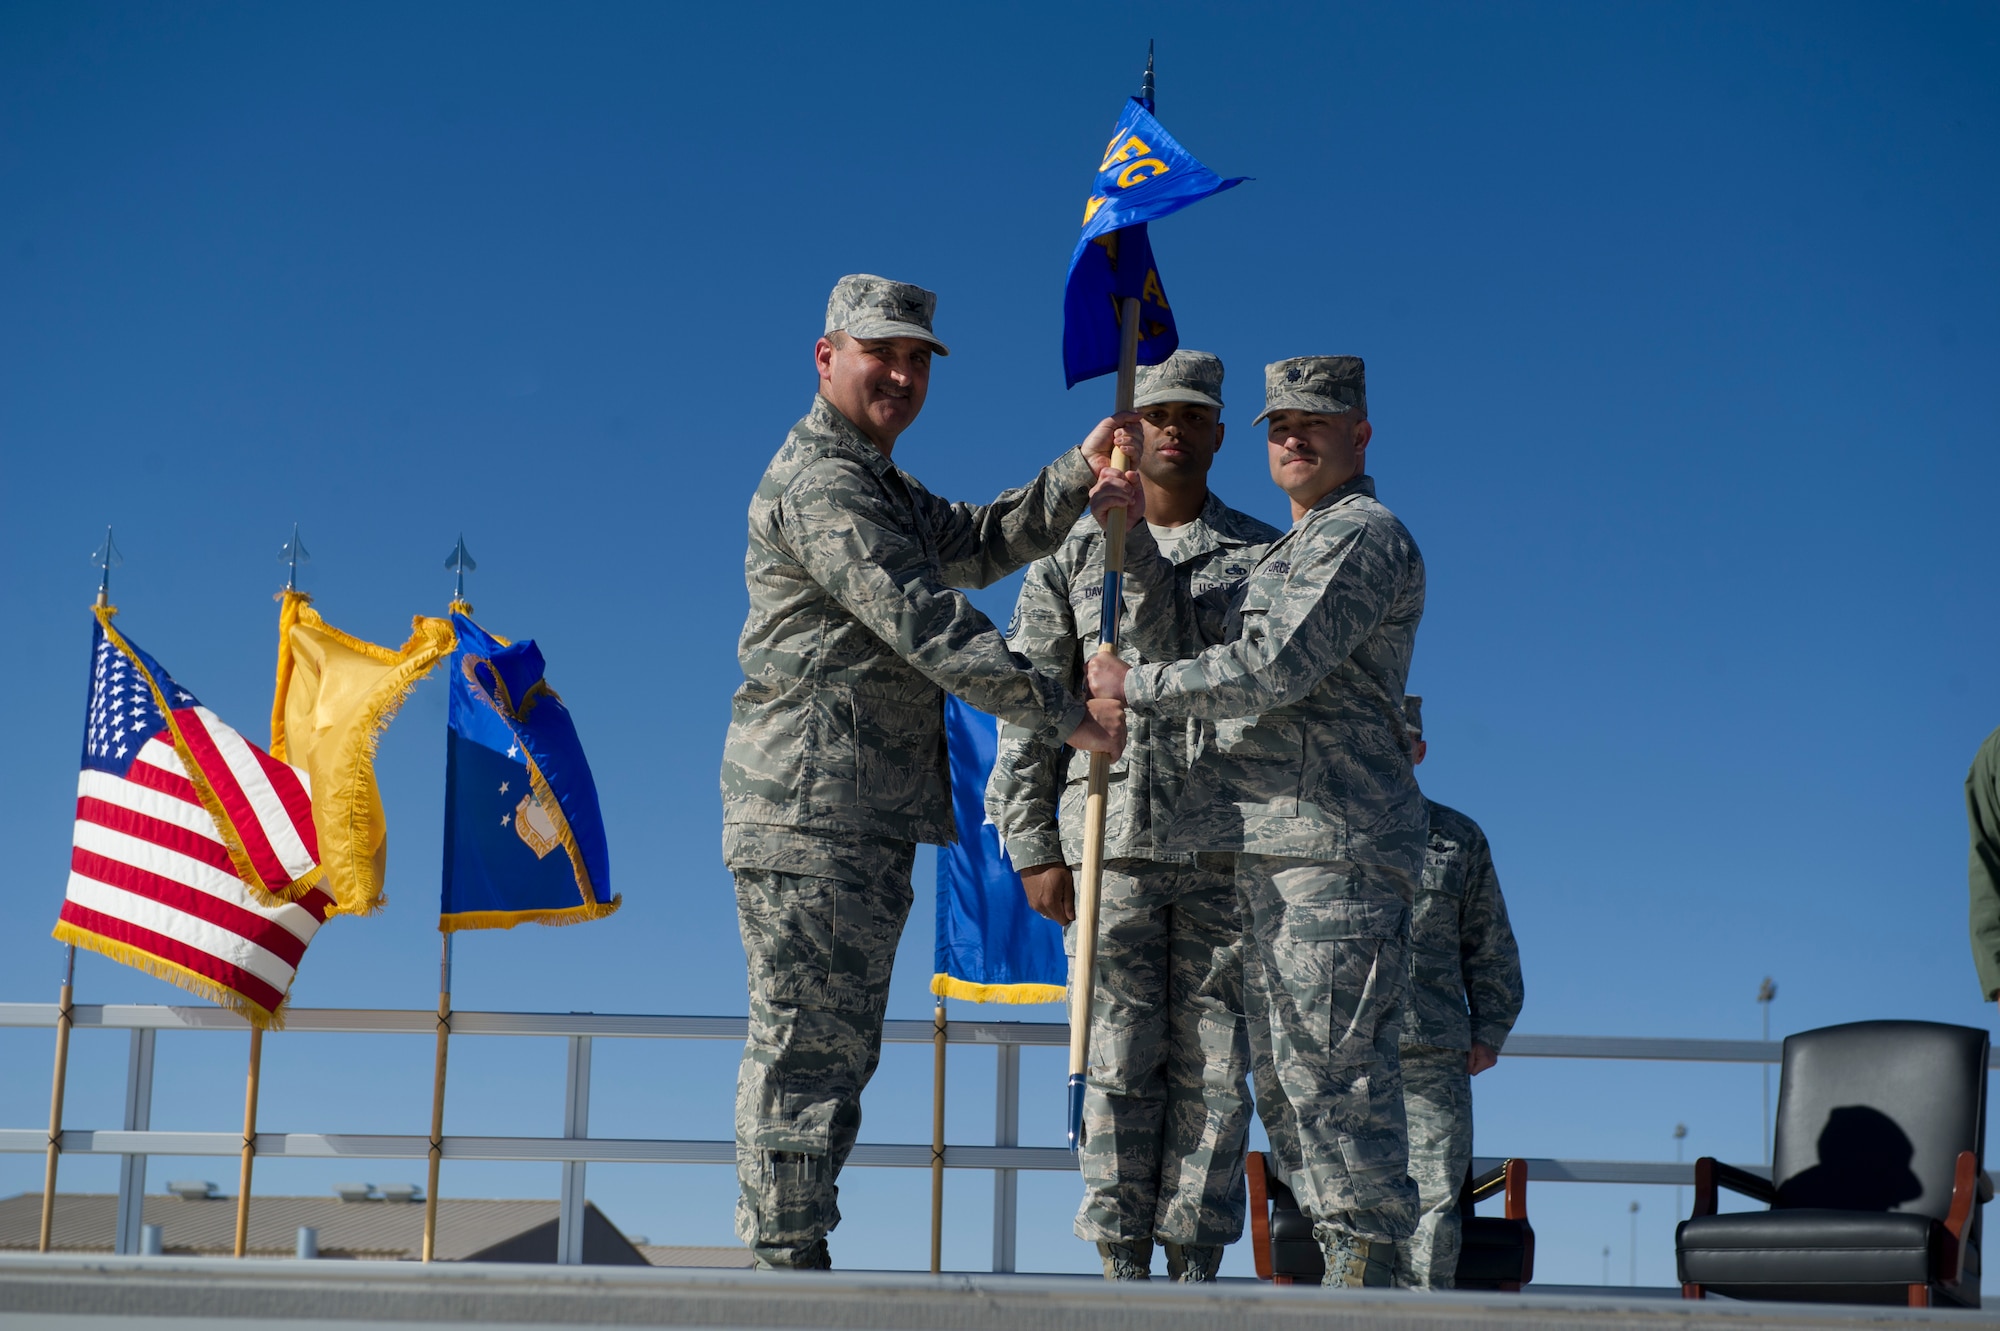 Col. Rodney Petithomme, 54th Fighter Group commander, passes the guidon of the 54th Aircraft Maintenance Squadron to Lt. Col. Dominick Martin during the 54th Fighter Group at Holloman Air Force Base, N.M., March 11. The 54th Fighter Group, a tenant unit at Holloman, is a detachment the 56th Fighter Wing at Luke Air Force Base, Ariz., and will ultimately operate two F-16 Fighting Falcon aircraft training squadrons. The 54th Fighter Group plus three squadrons were activated at the ceremony: the 311th Fighter Squadron, the 54th Operations Support Squadron and the 54th Aircraft Maintenance Squadron. (U.S. Air Force photo by Airman 1st Class Chase A. Cannon/Released)